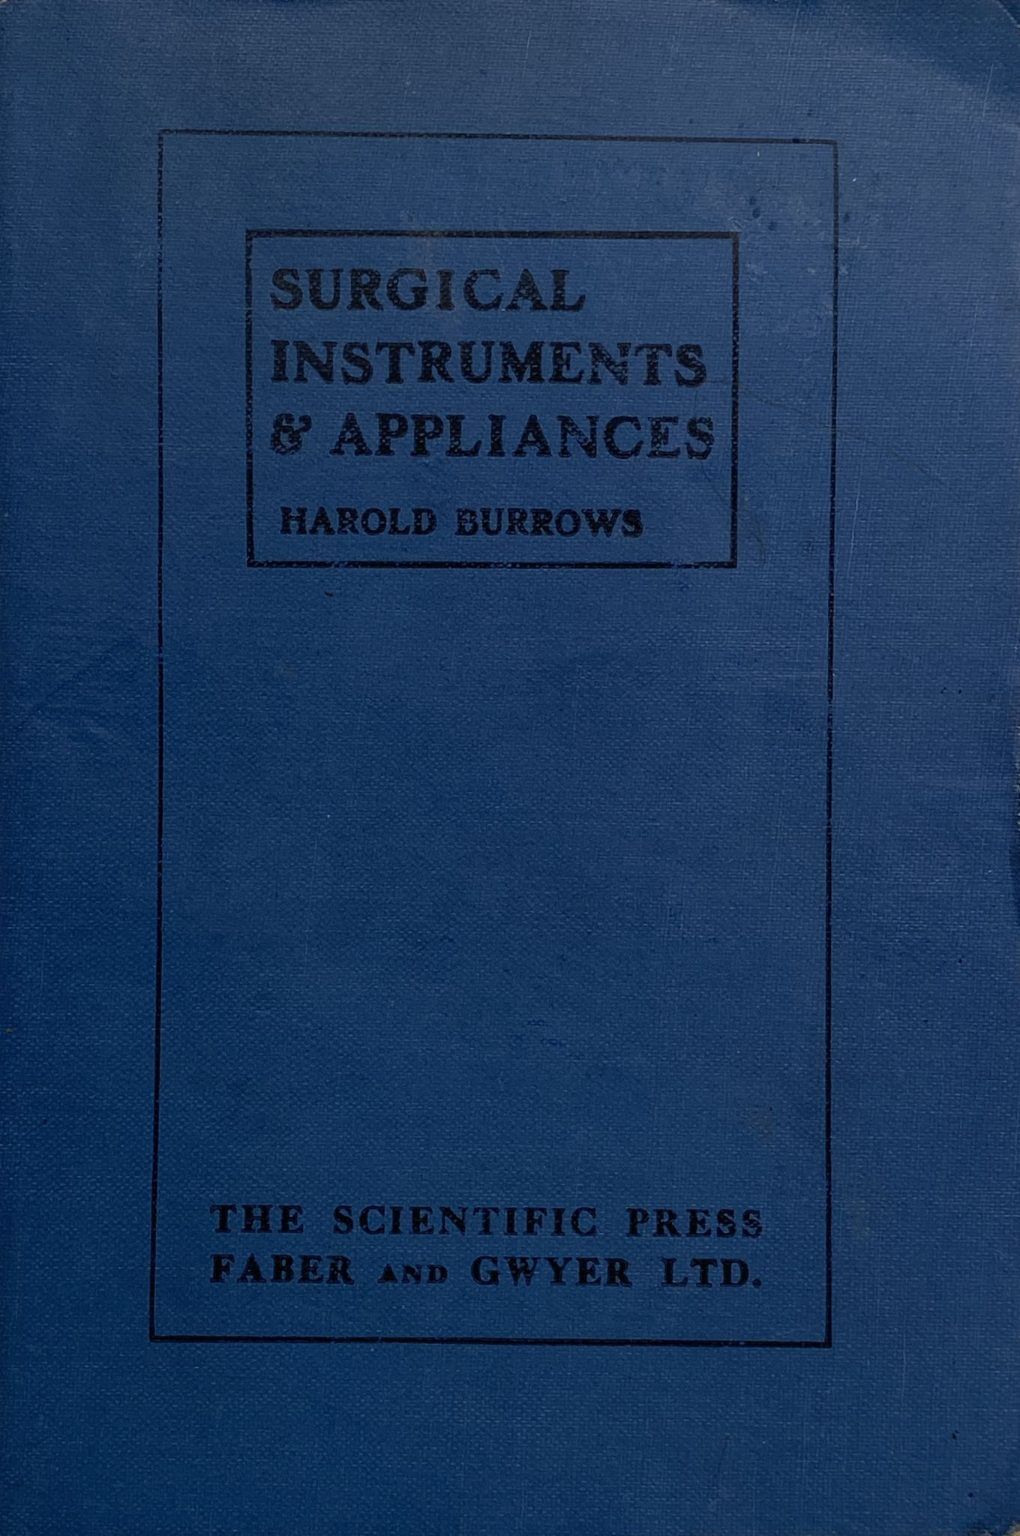 SURGICAL INSTRUMENTS & APPLIANCES Used in Operations